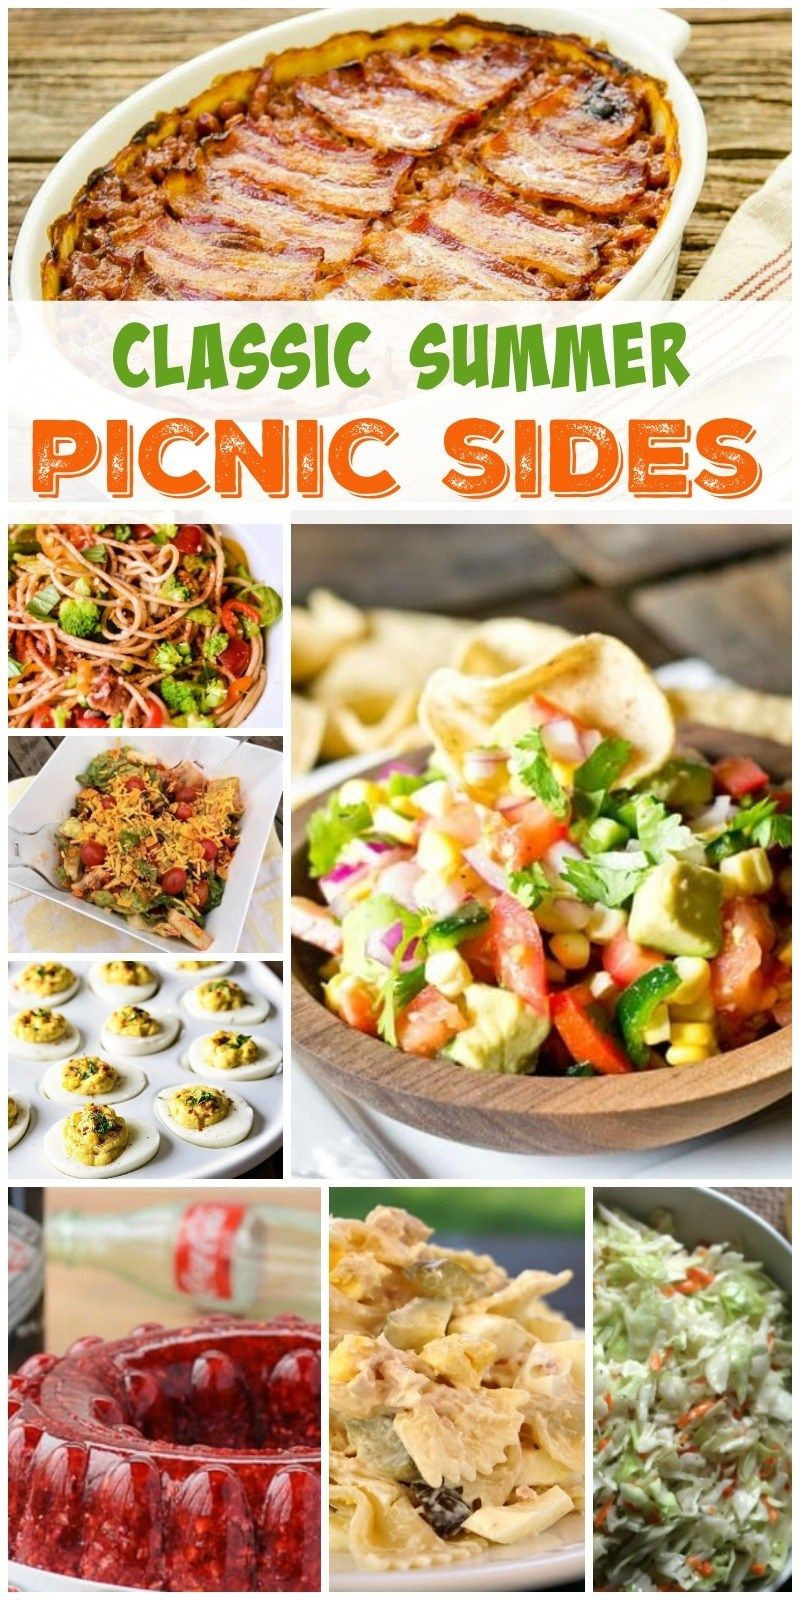 Picnic Side Dishes Ideas
 Perfect Picnic Side Dish Ideas